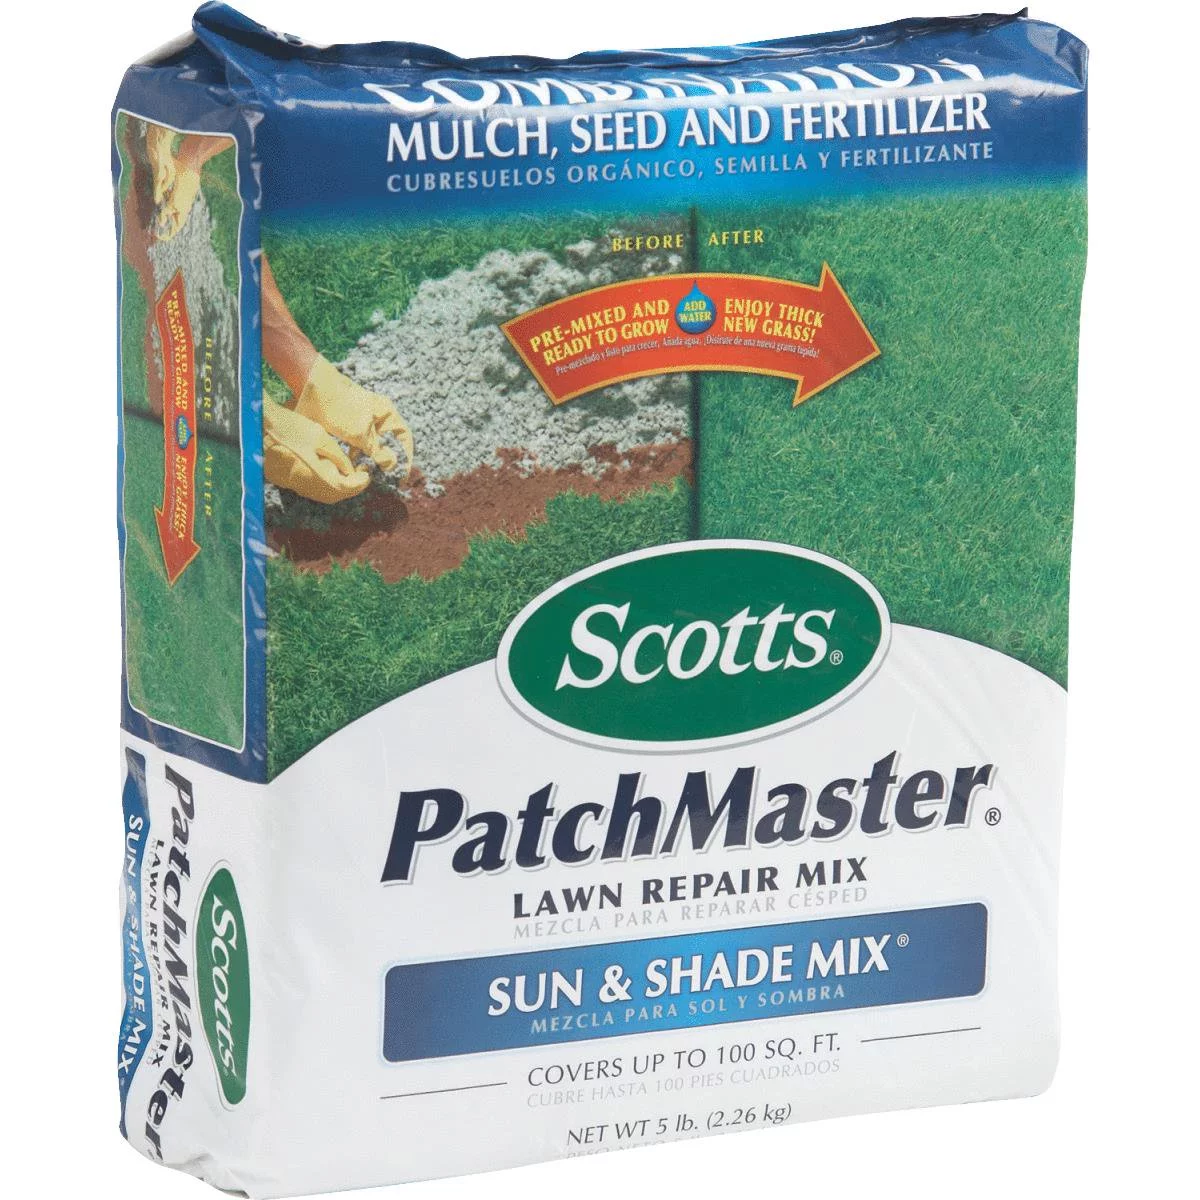 What Kind Of Grass Is Scotts Sun And Shade Mix